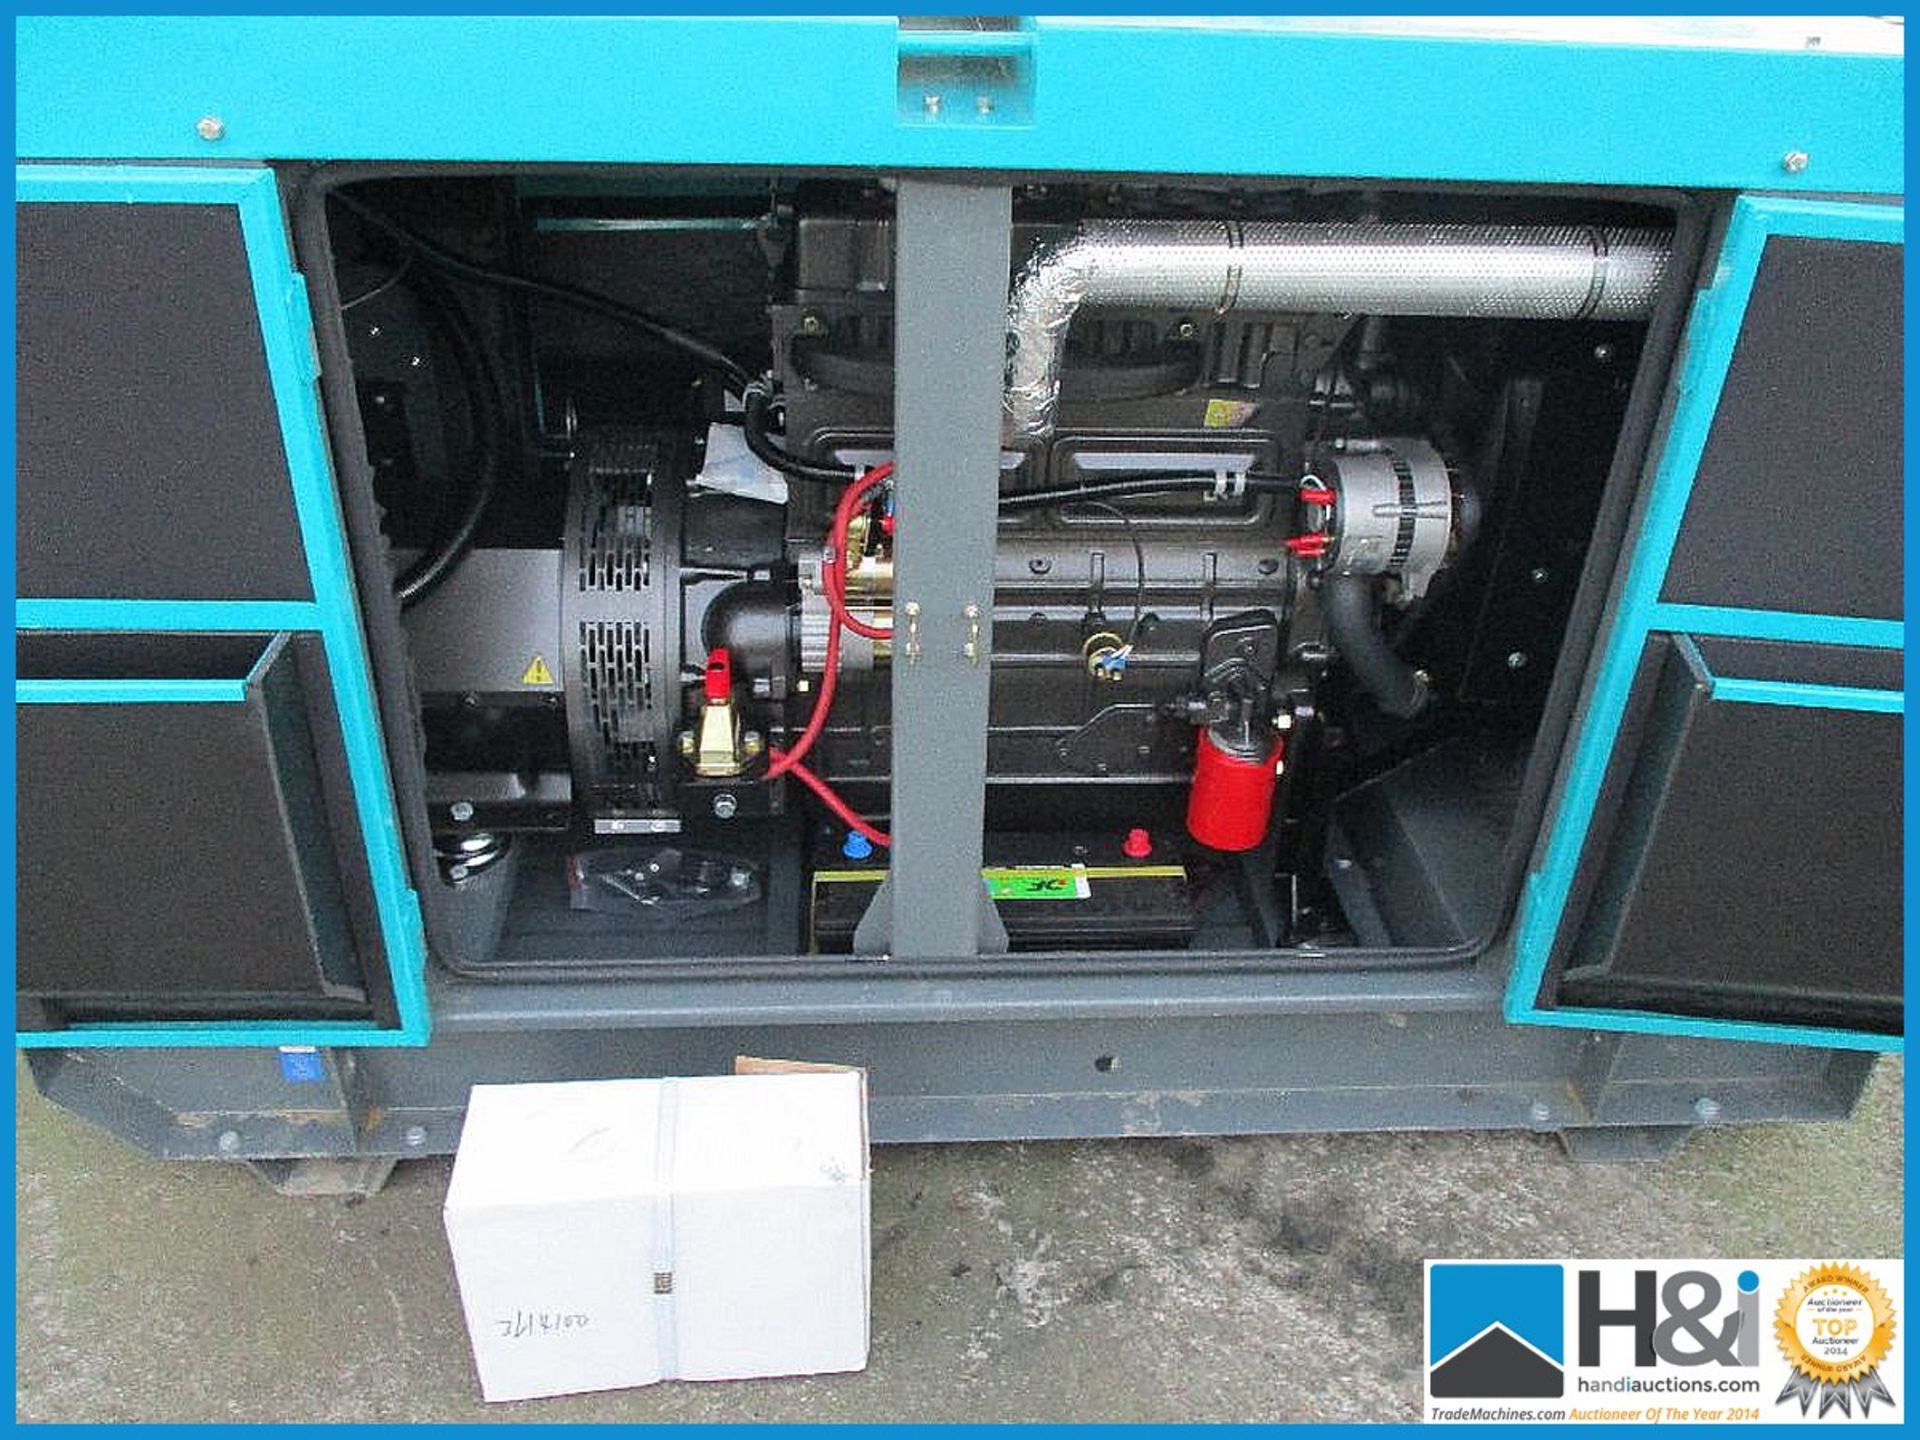 Brand new, unused Ashita AG3-40SBG 30KvA generator. No oil or water and ready for transportation. - Image 4 of 5